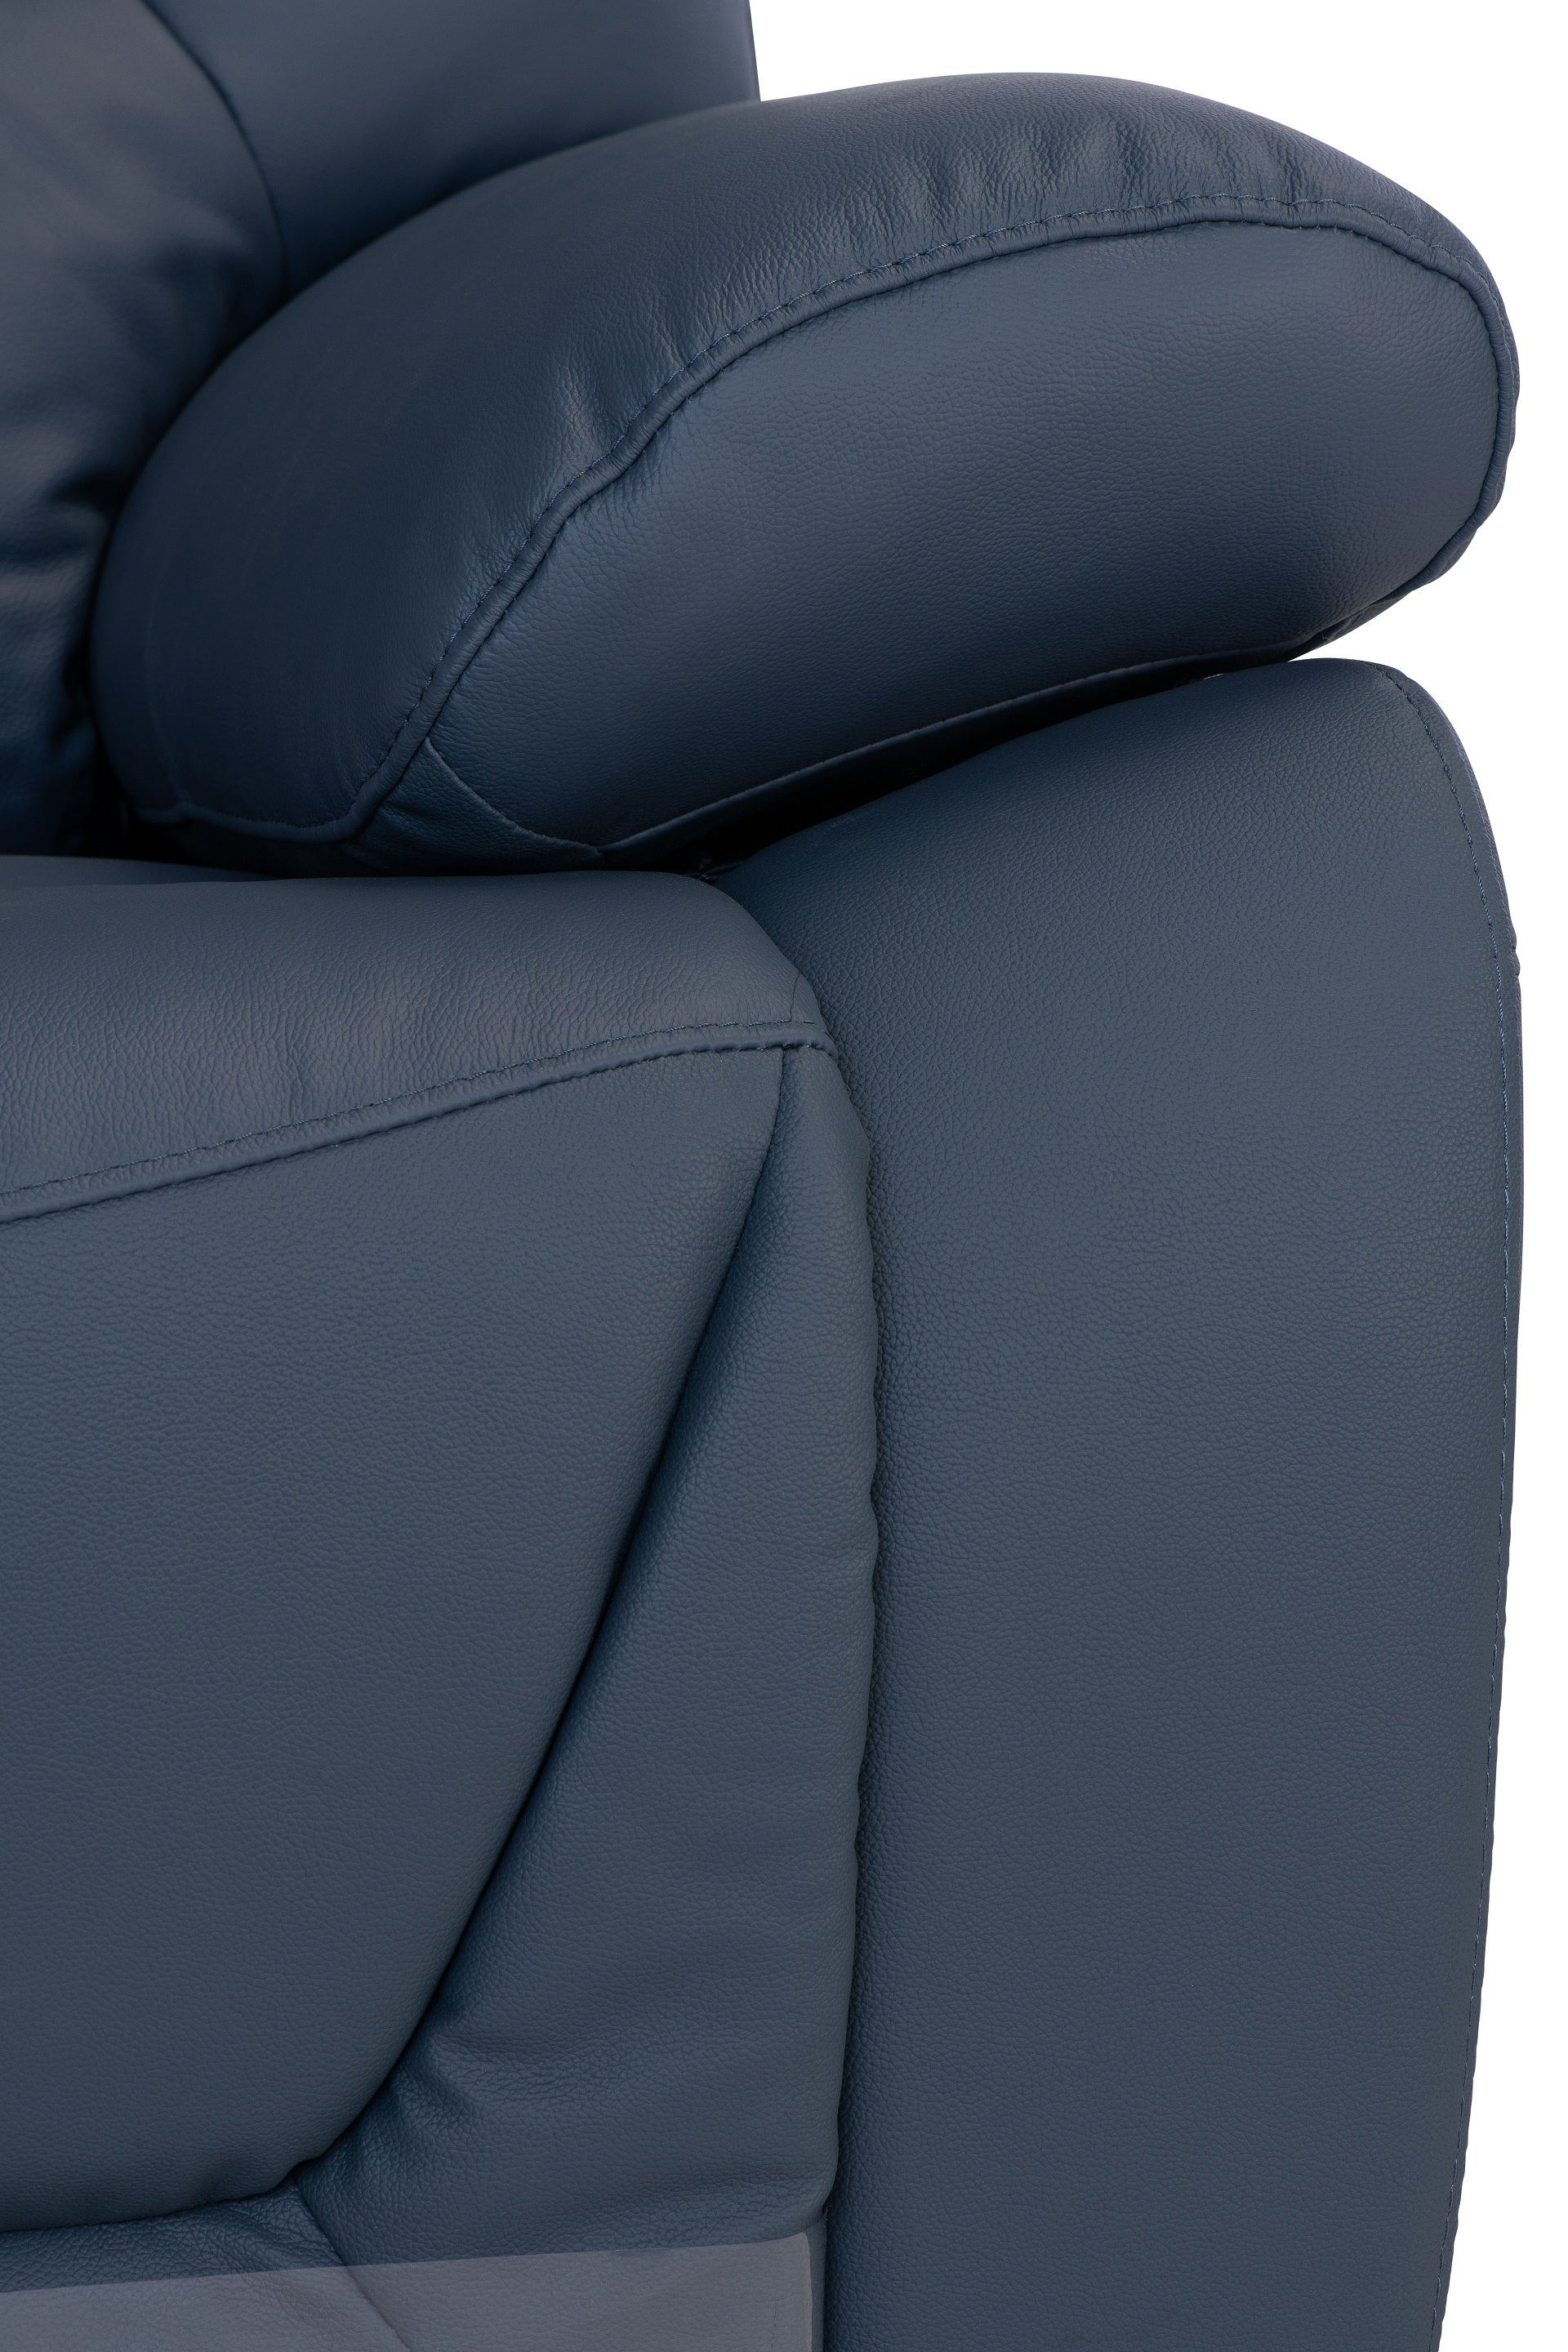 Darah Leather Electric 3 Seater Recliner - Blue